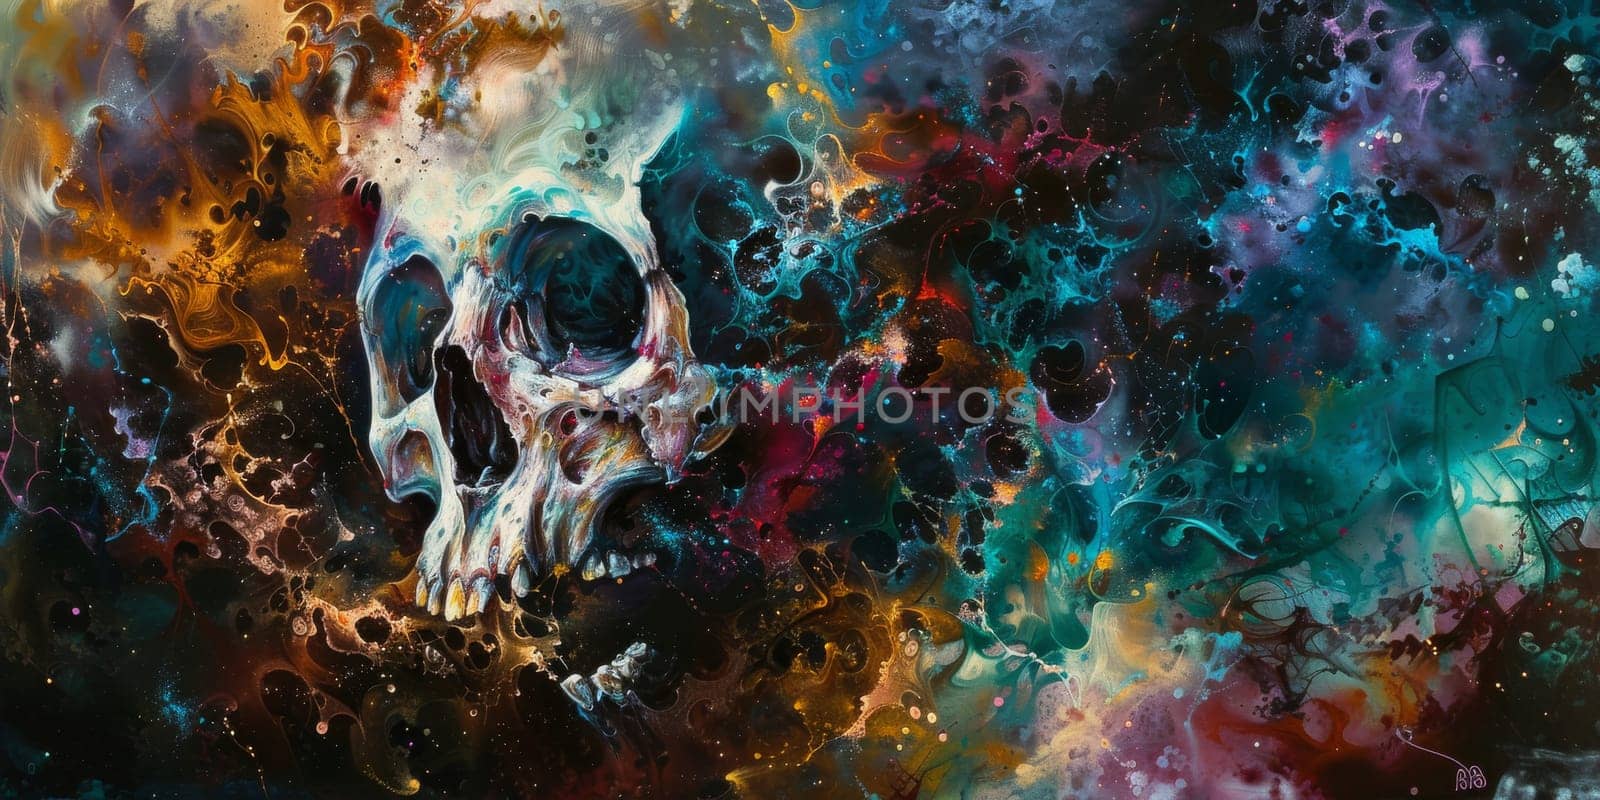 A painting of a skull against a vibrant, colorful backdrop by Kadula